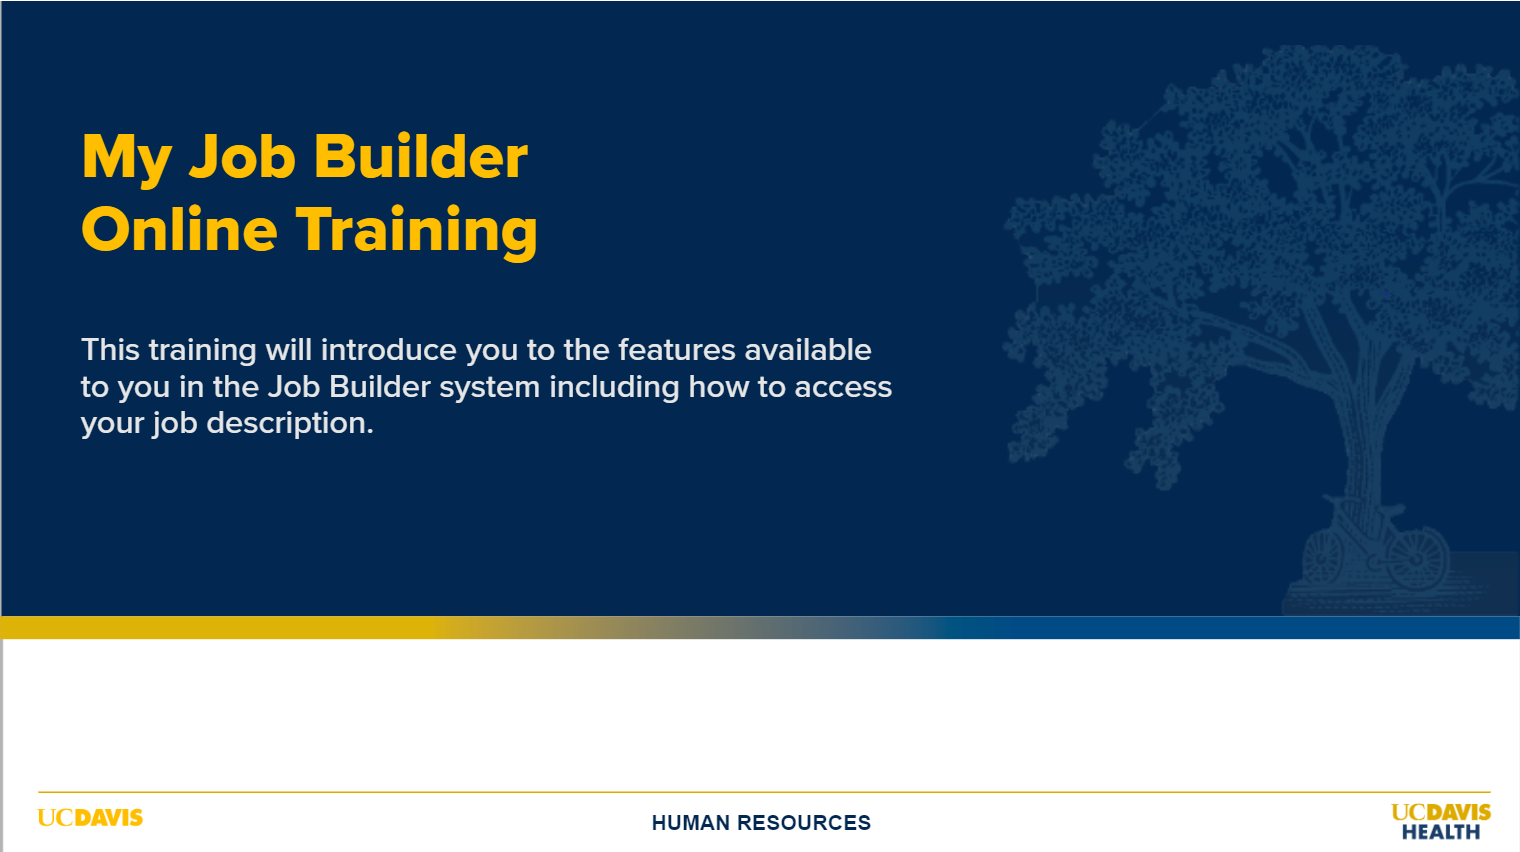 Opening slide to training. Reads My Job Builder Online Training. This training will introduce you to the features available to you in the Job Builder system including how to access your job description. 